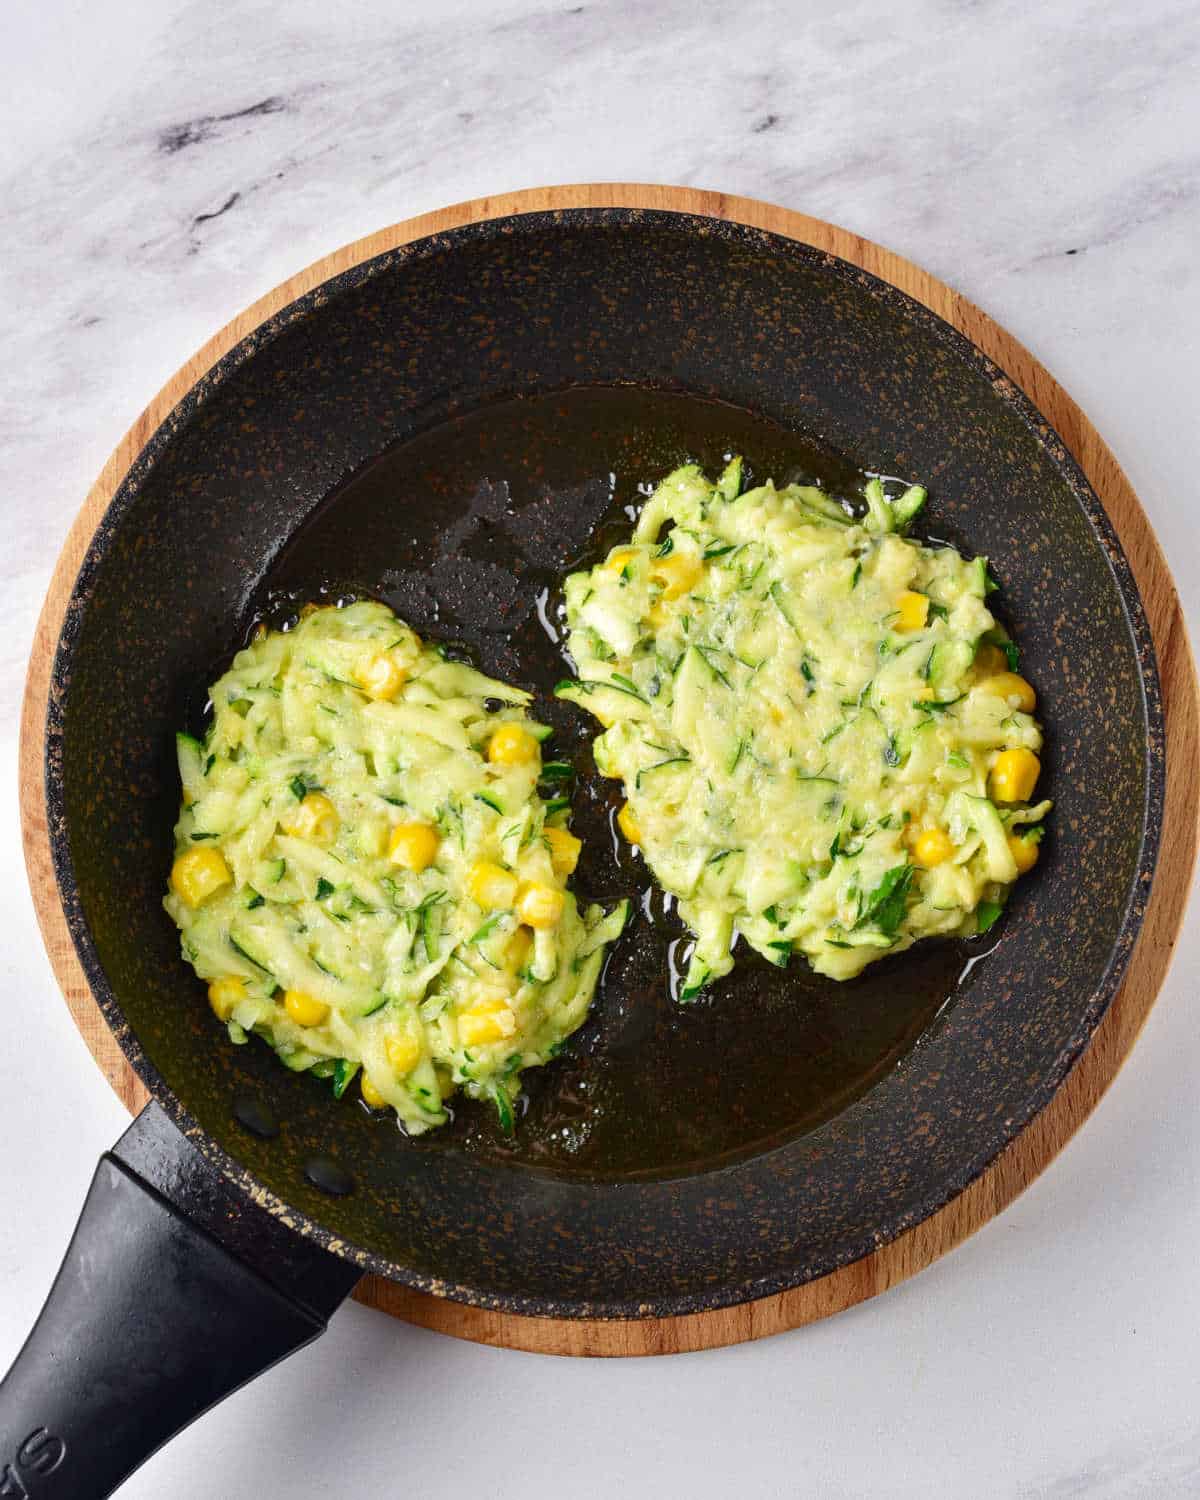 Grey marbled surface with dark skillet containing two zucchini corn fritters before flipping.